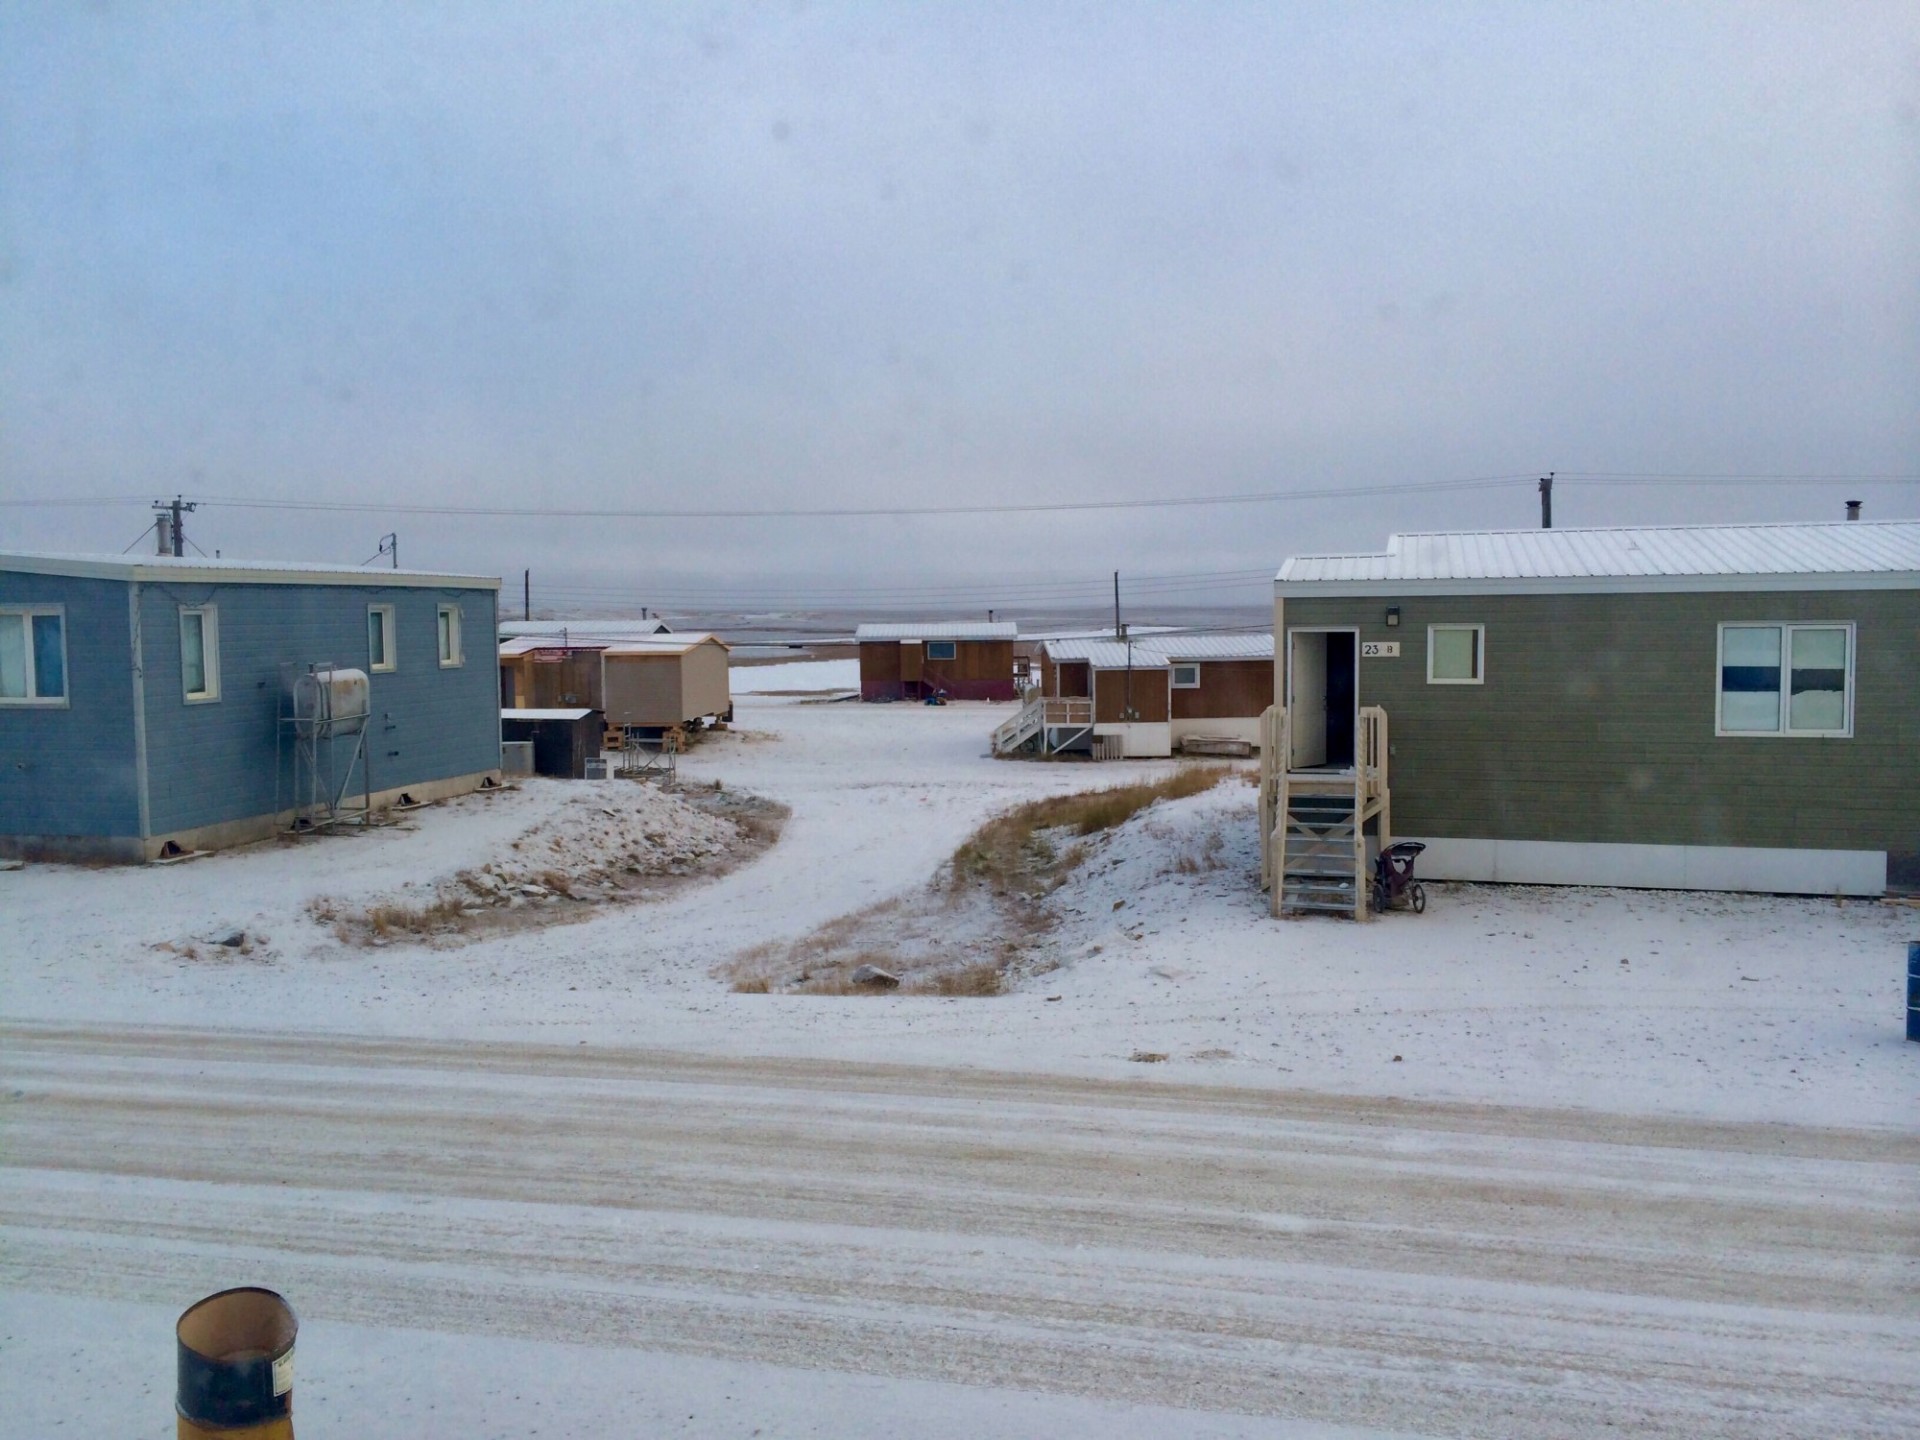 Single story houses in a snowy landscape in Nunavut, Canada